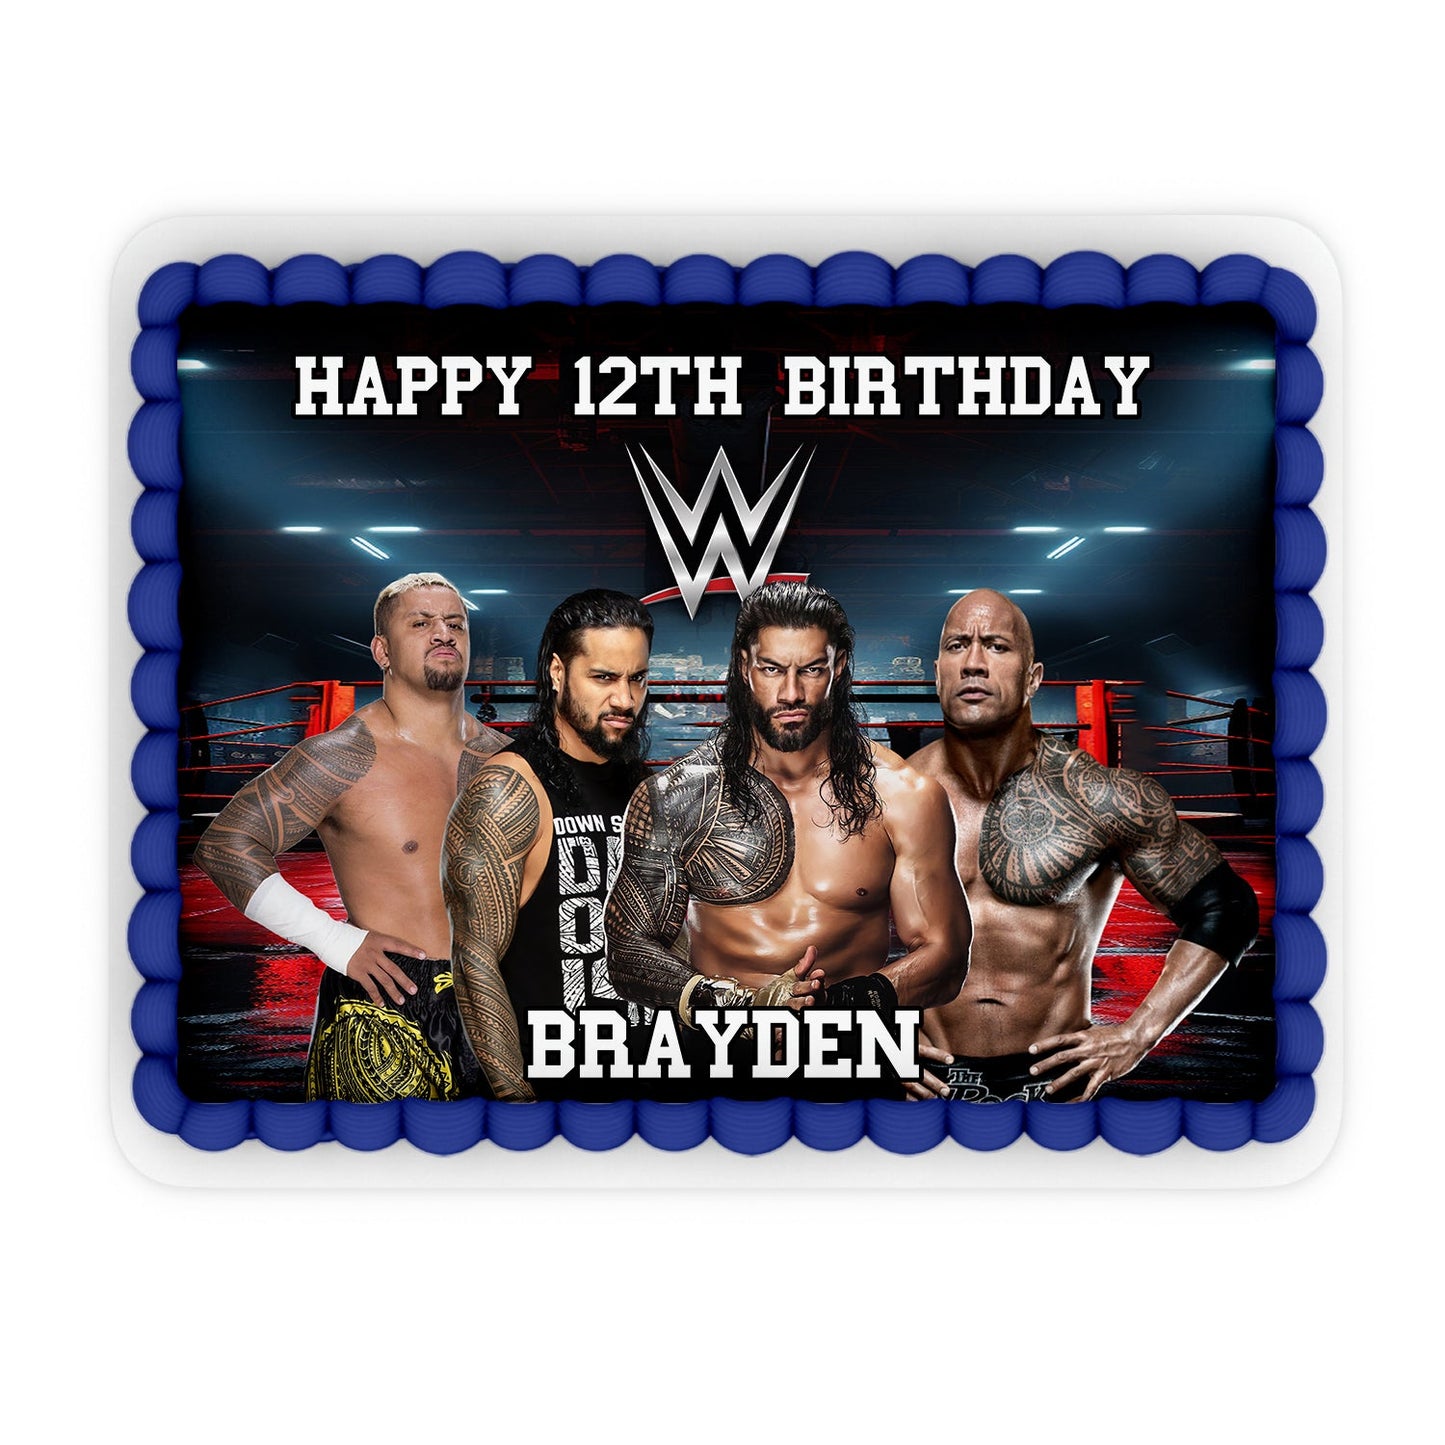 Rectangle WWE The Bloodline personalized cake images